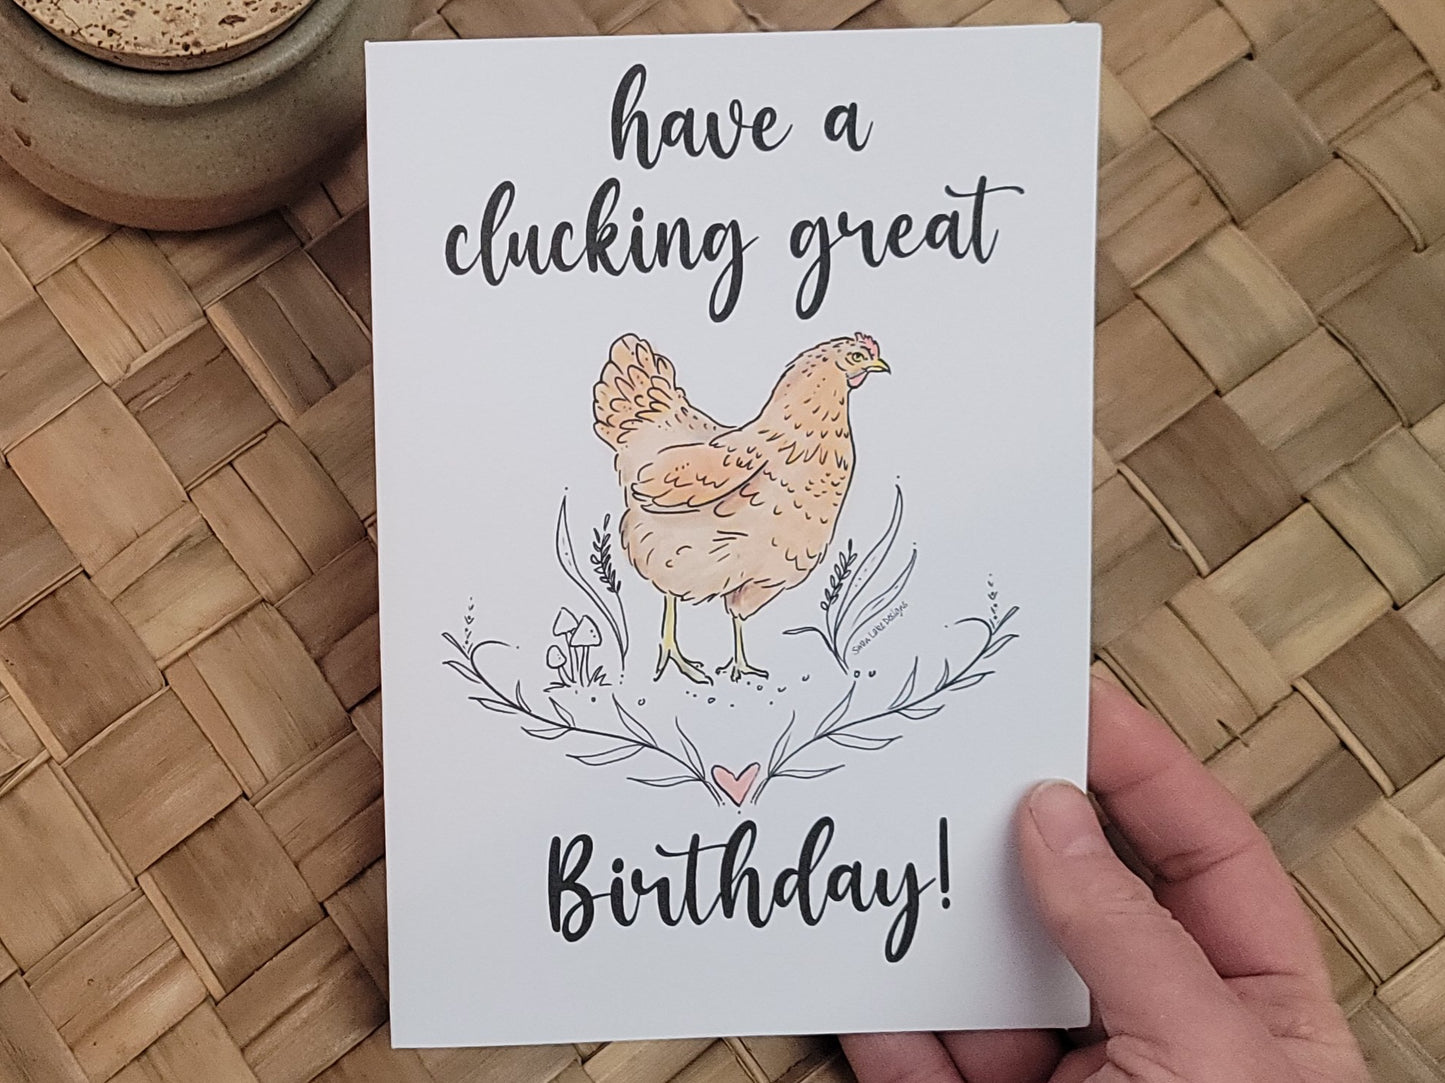 card - cute chicken pun "have a clucking great birthday"  *free shipping